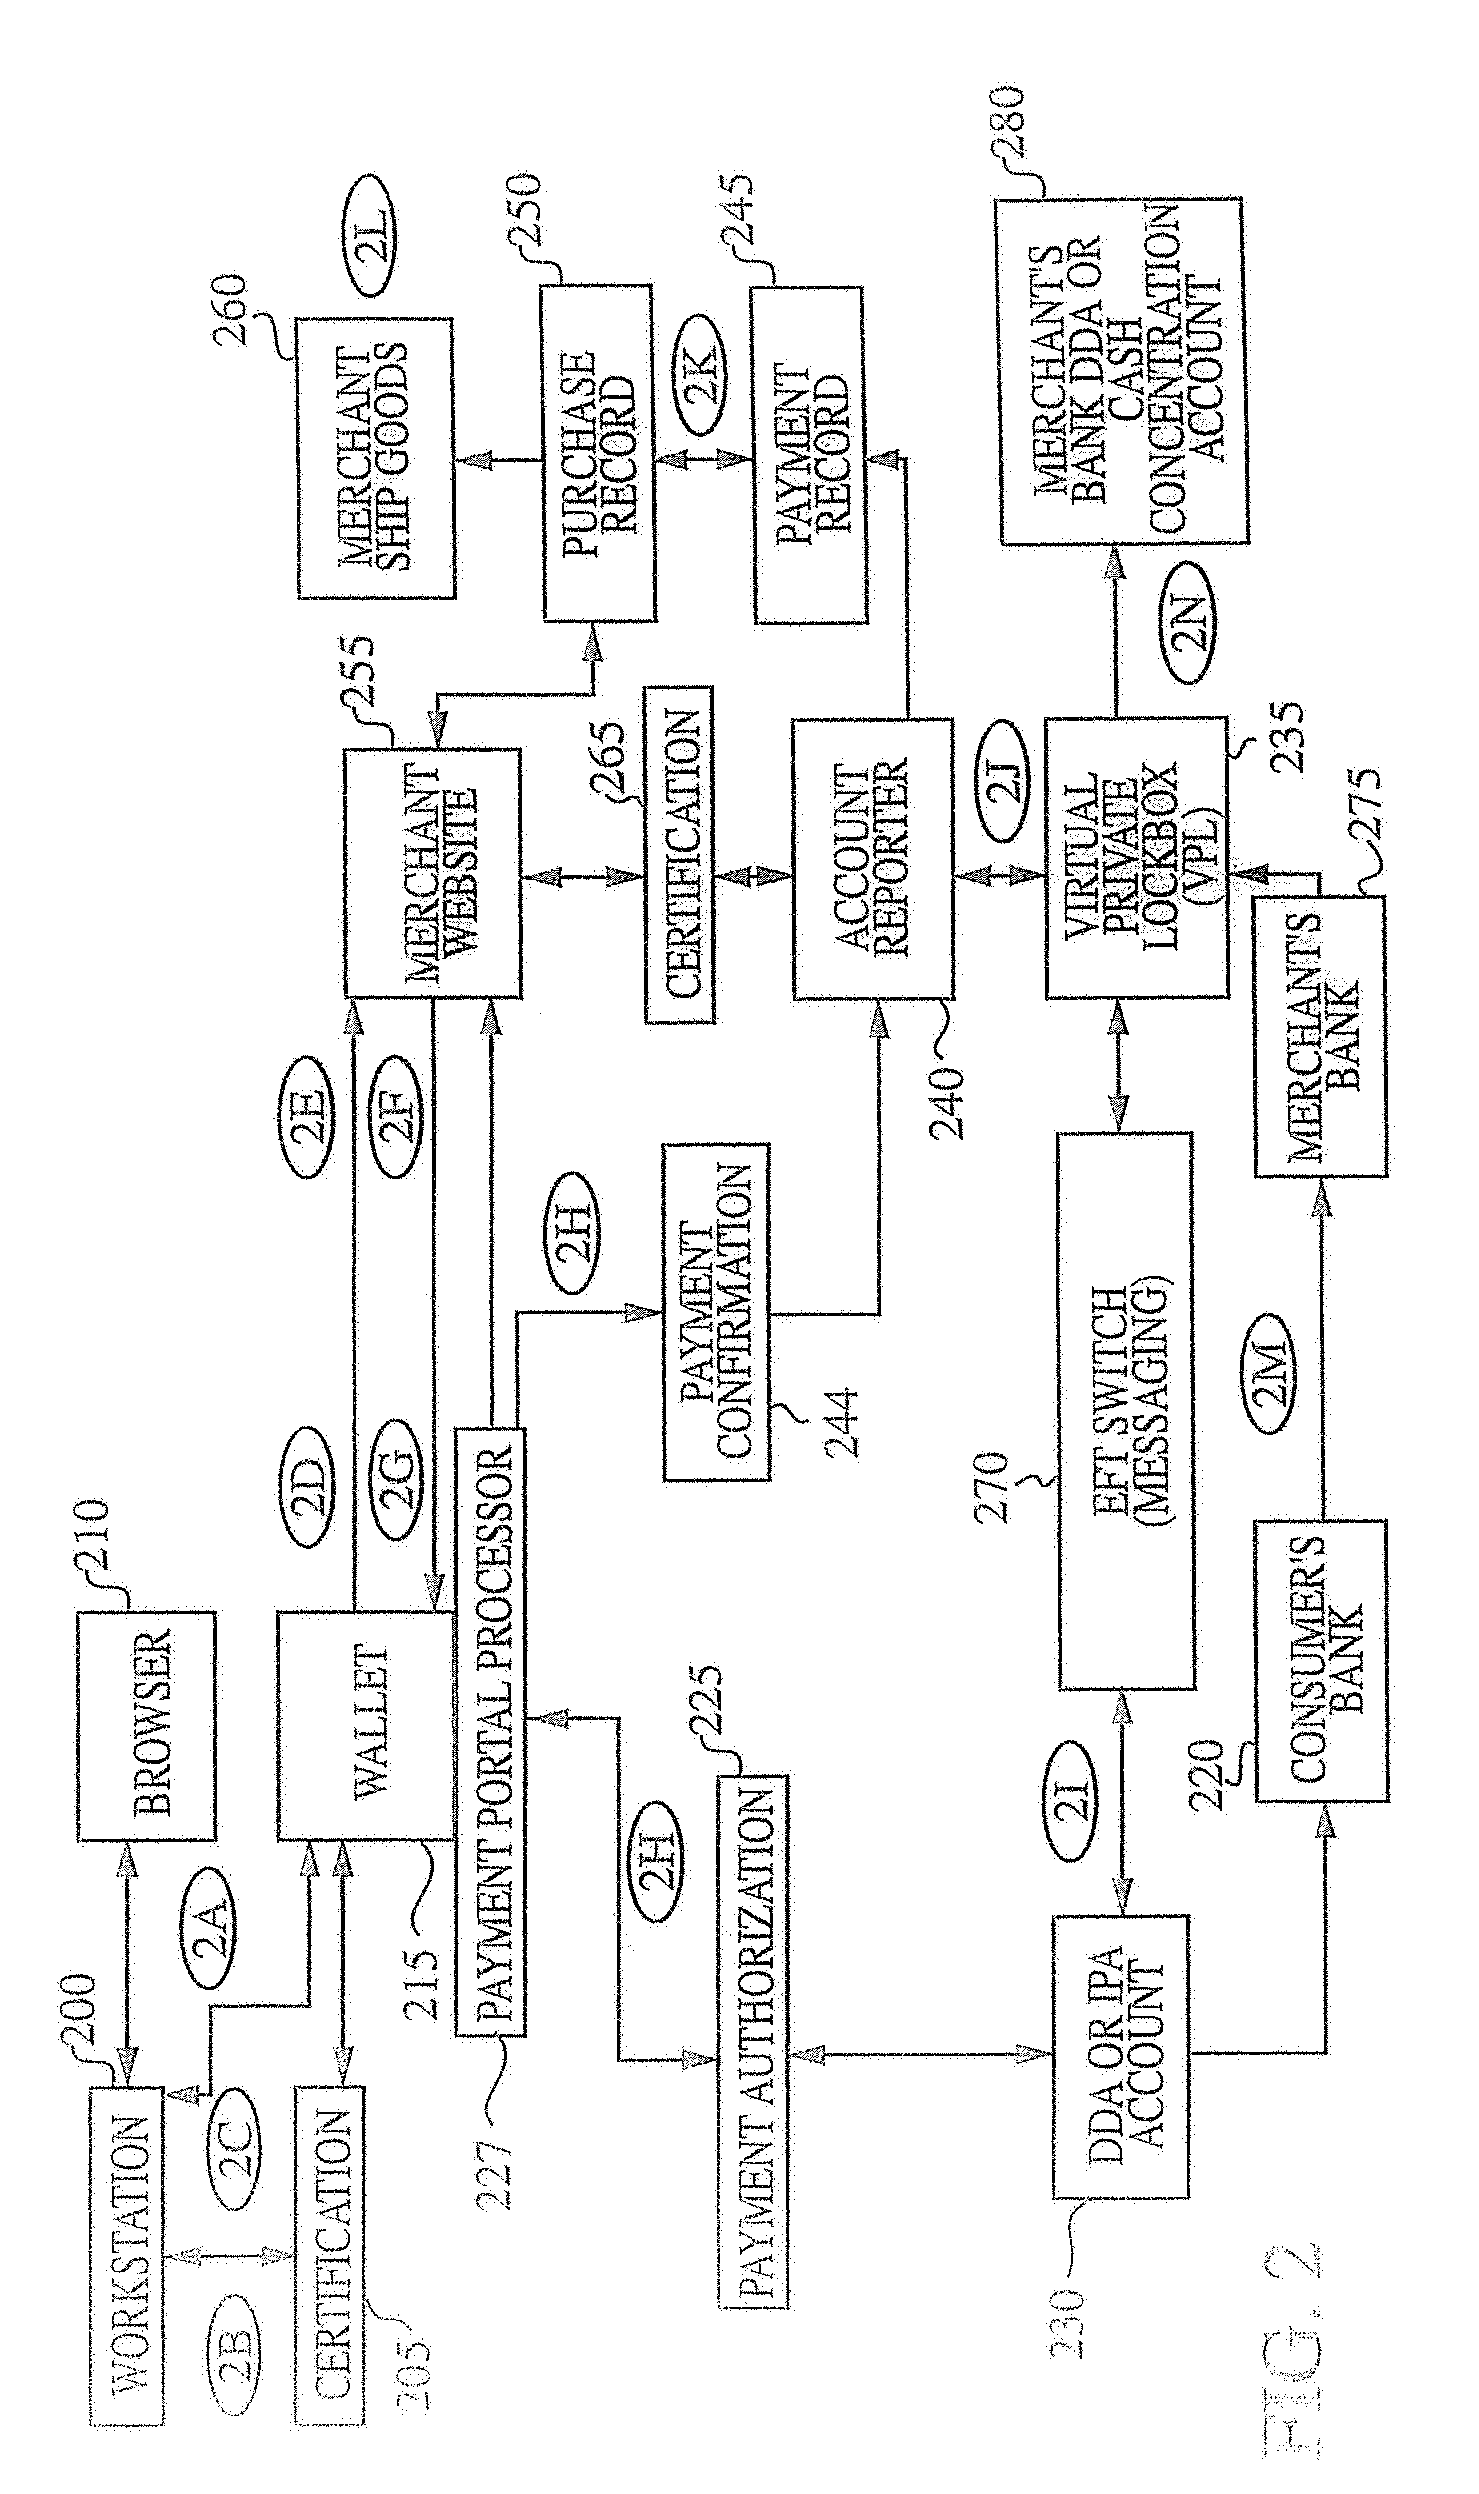 Method And System For Processing Internet Payments Using The Electronic Funds Transfer Network